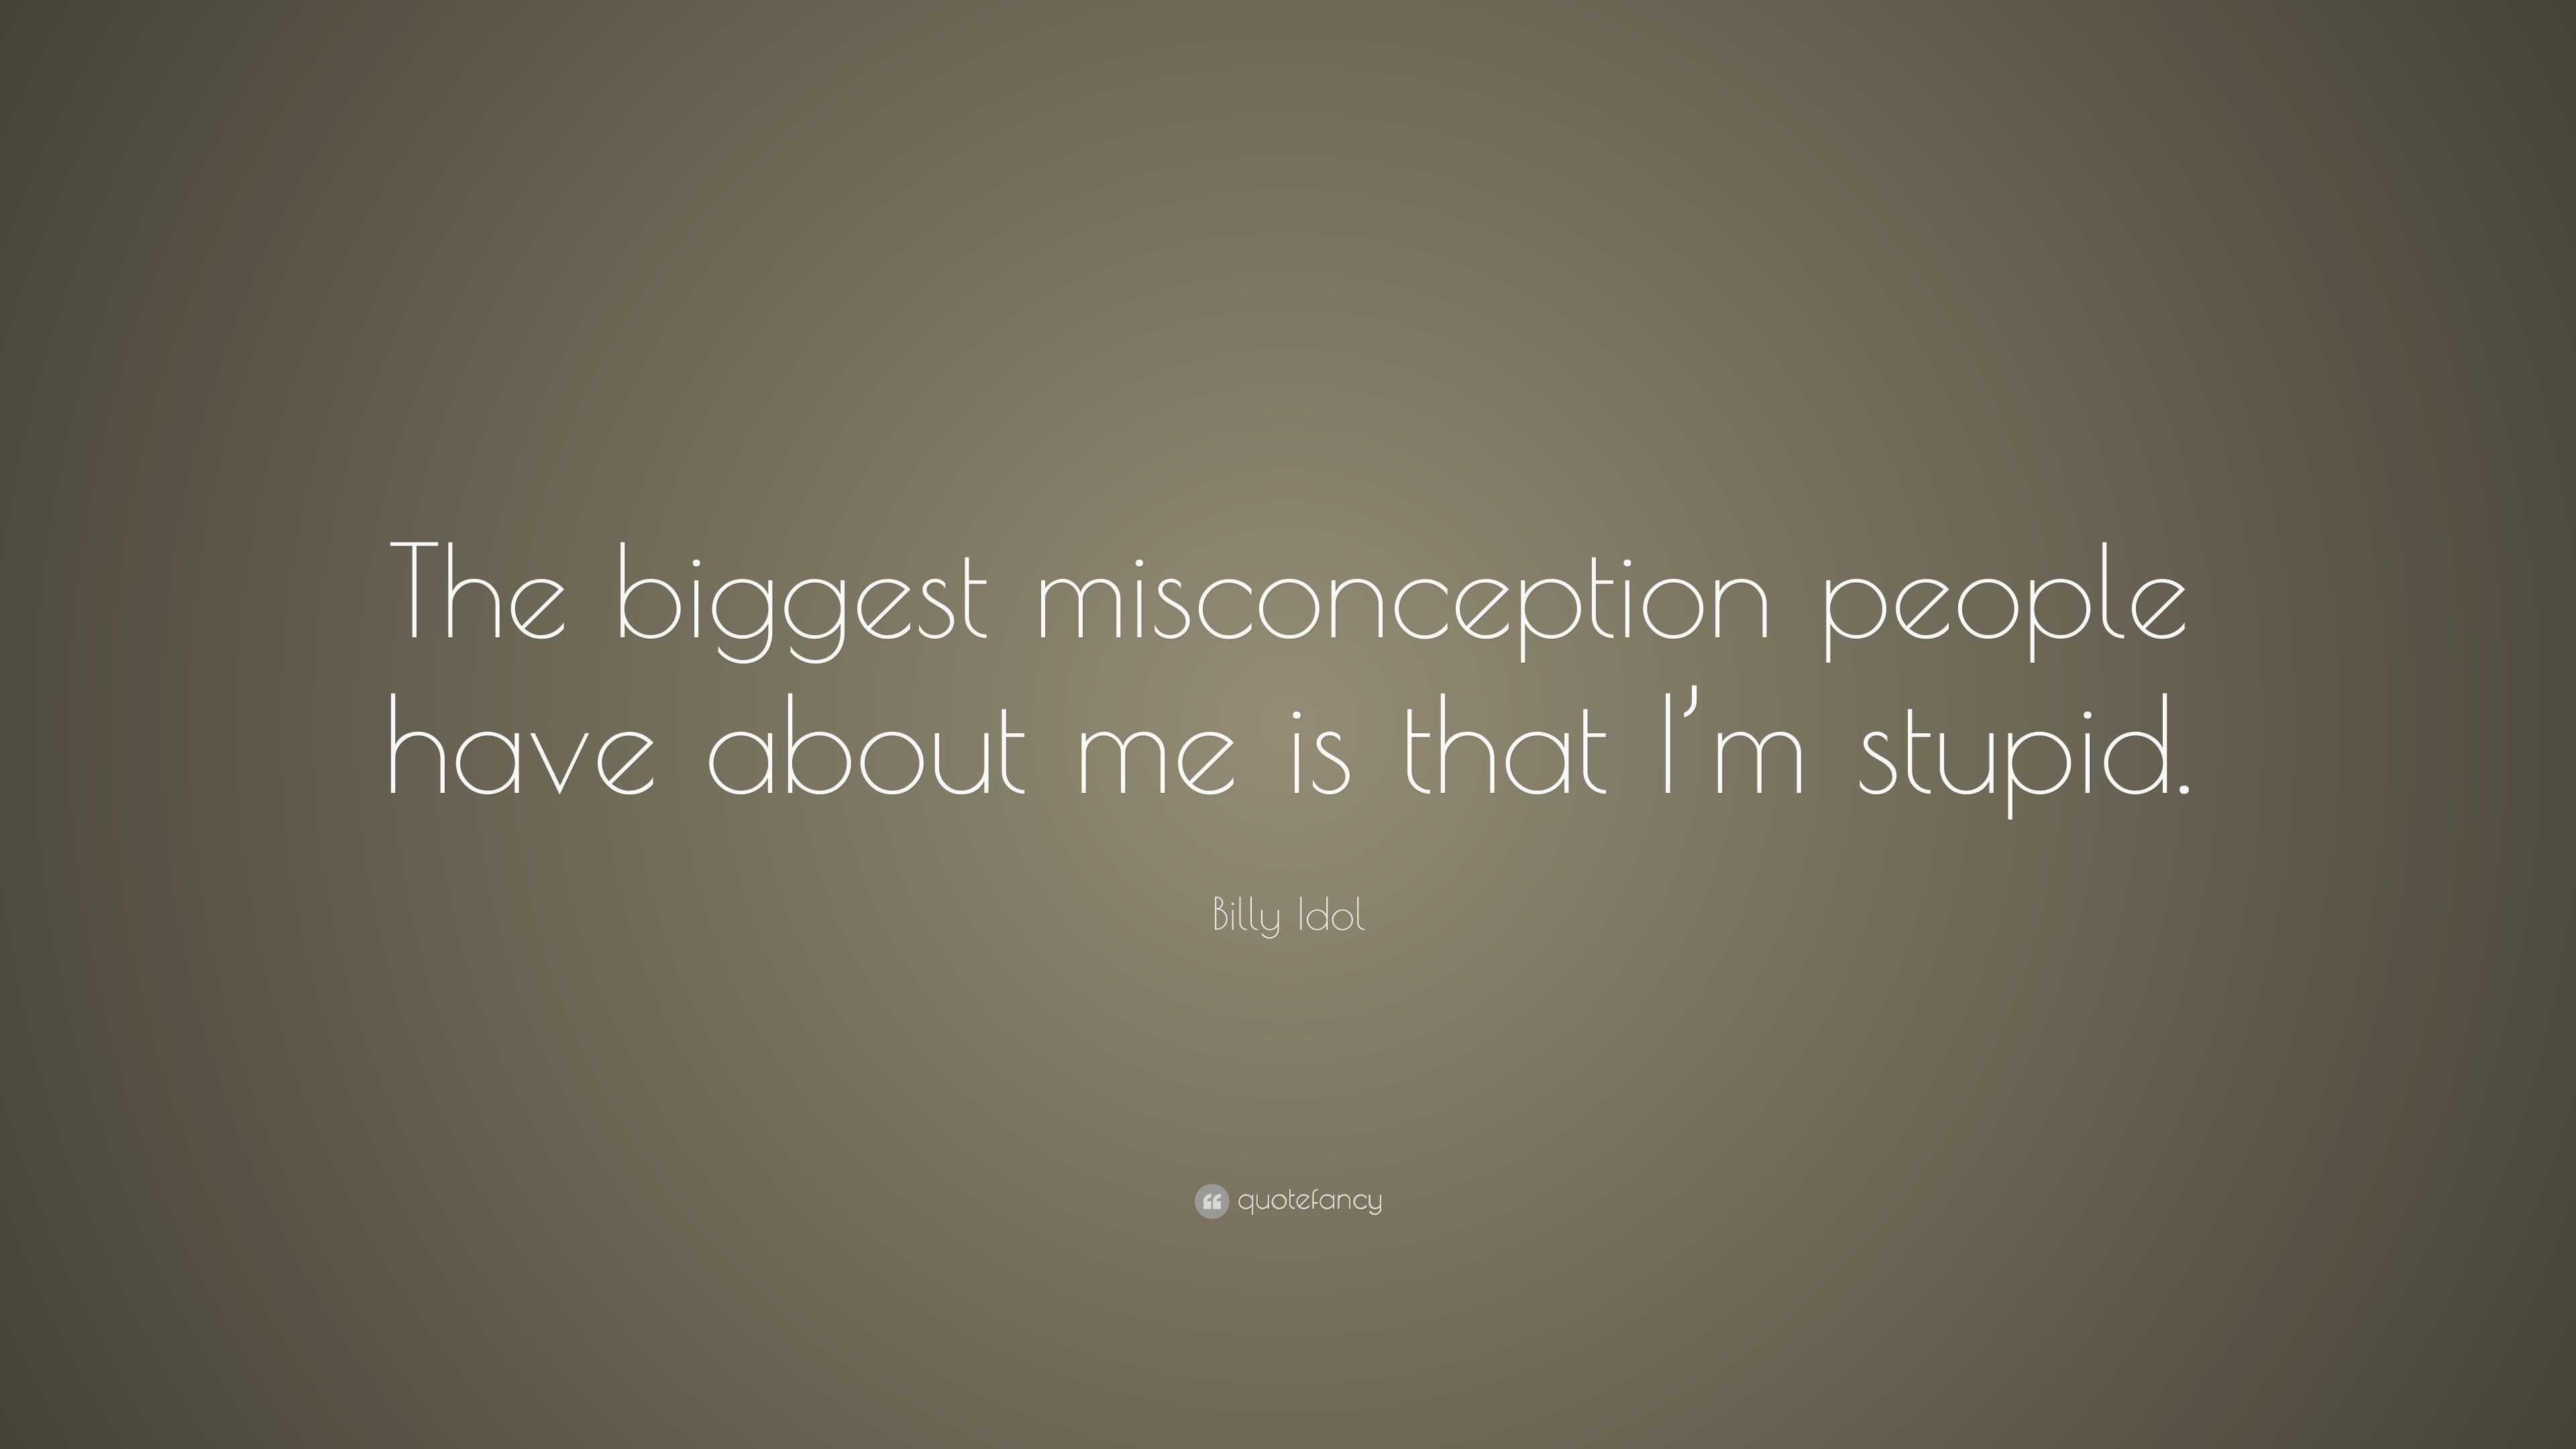 Billy Idol Quote “The biggest misconception people have about me is